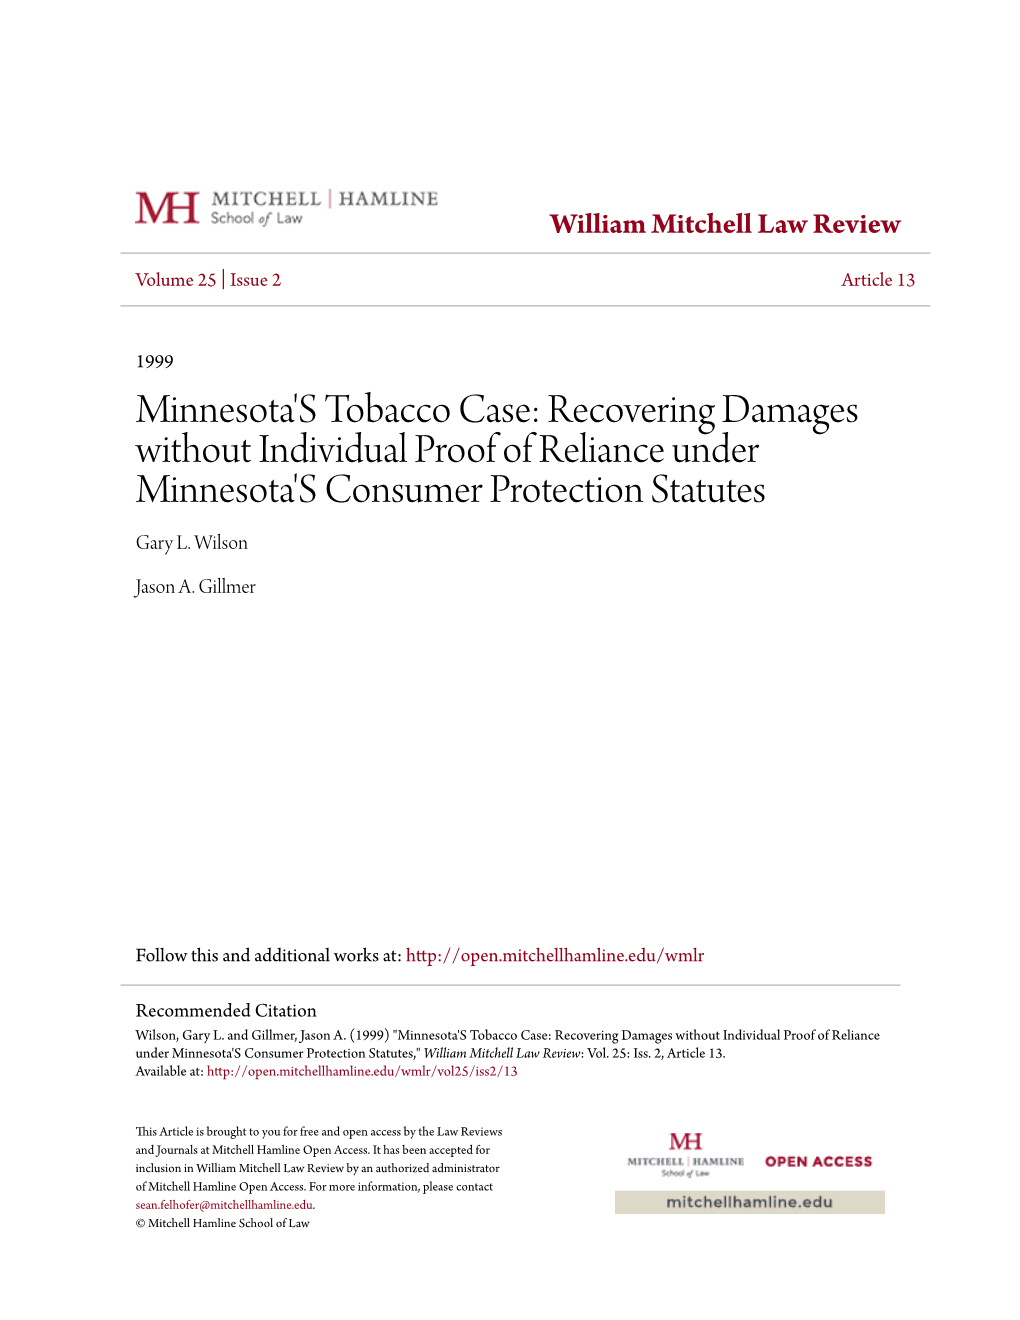 Minnesota's Tobacco Case: Recovering Damages Without Individual Proof of Reliance Under Minnesota's Consumer Protection Statutes Gary L